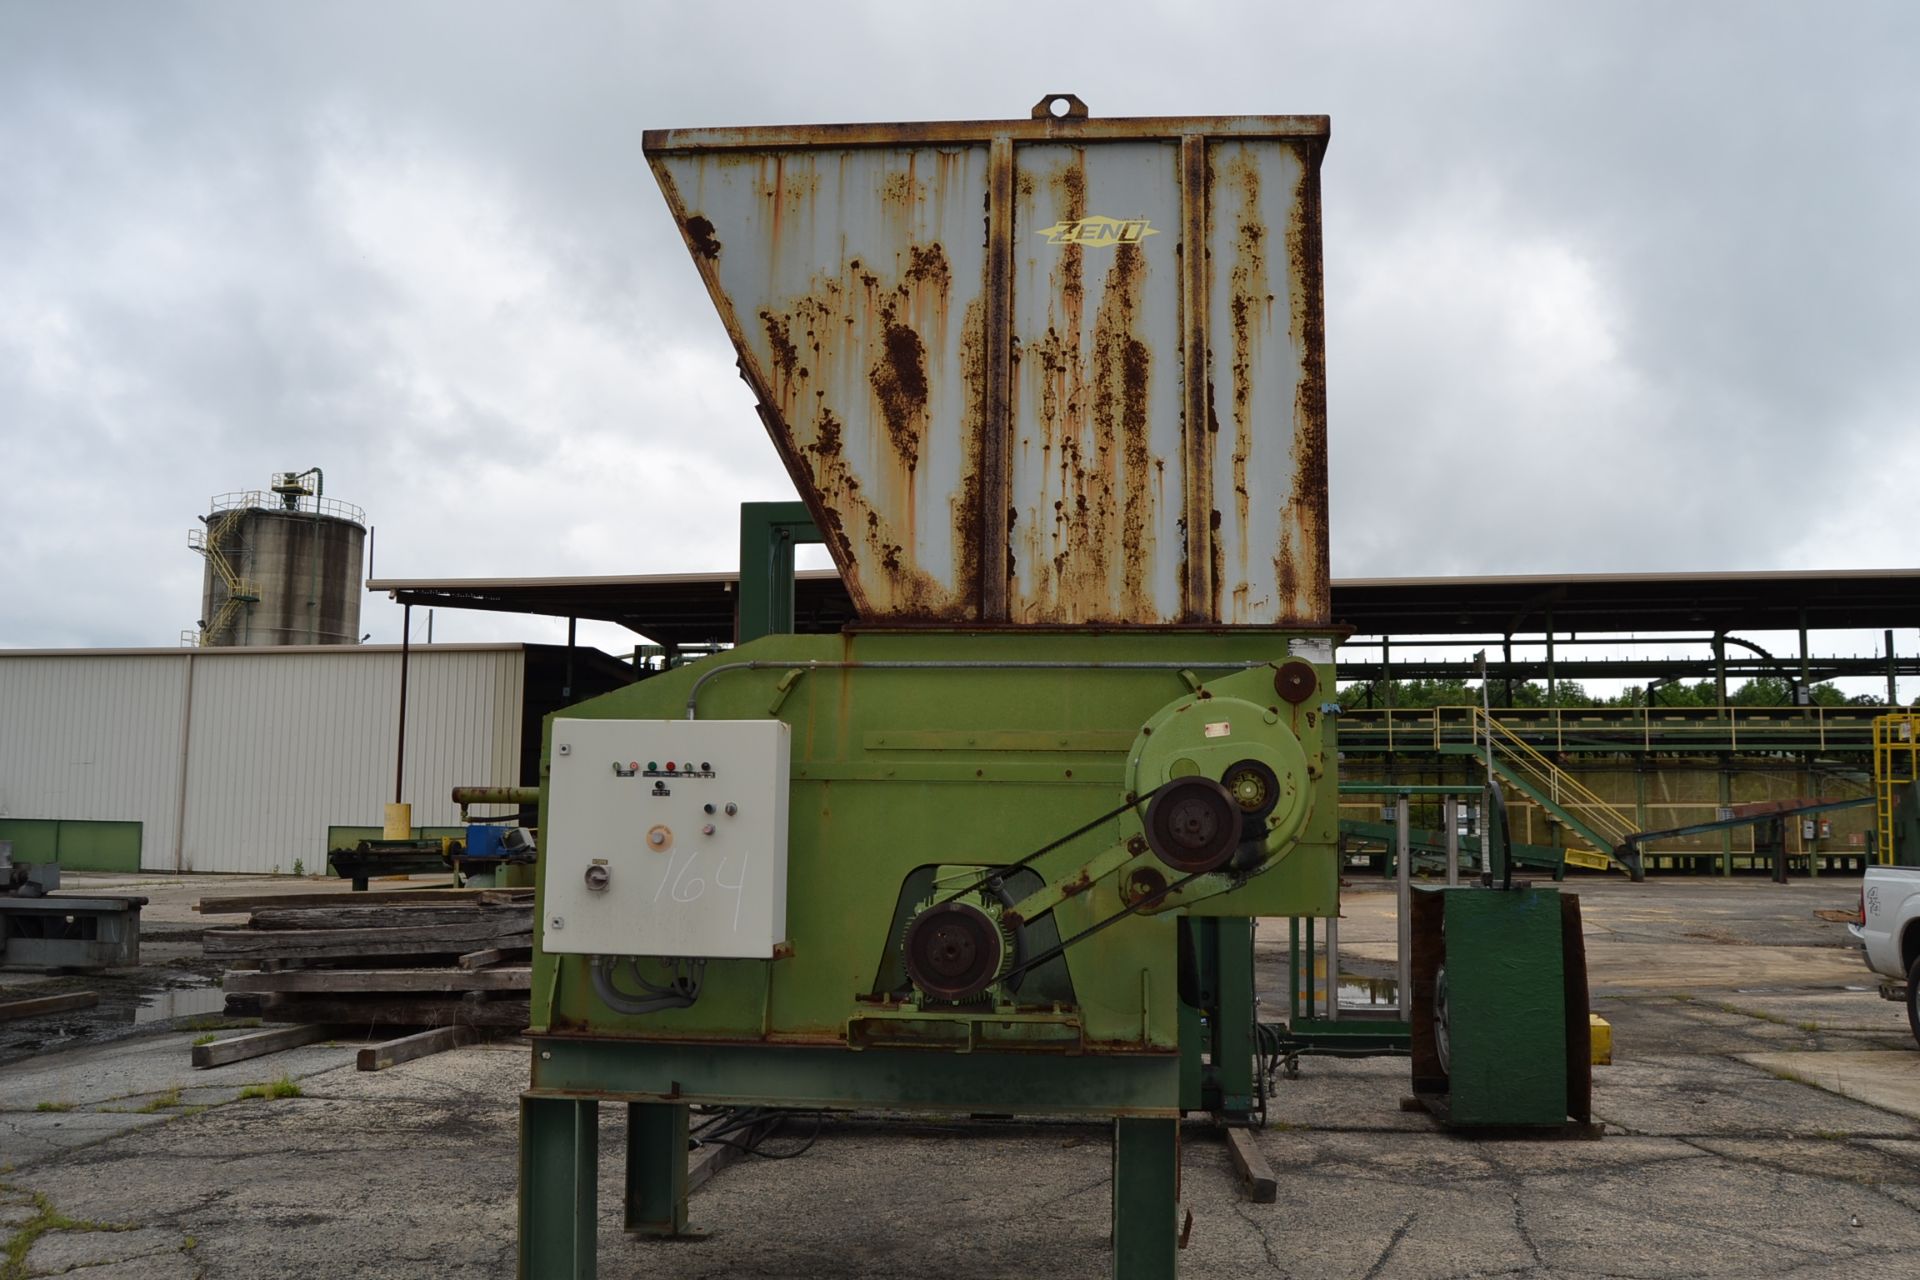 ZENO 48"X60" SLOW SPEED GRINDER 55 HP MOTOR SN#95A-4238 (NOT INSTALLED) - Image 2 of 3